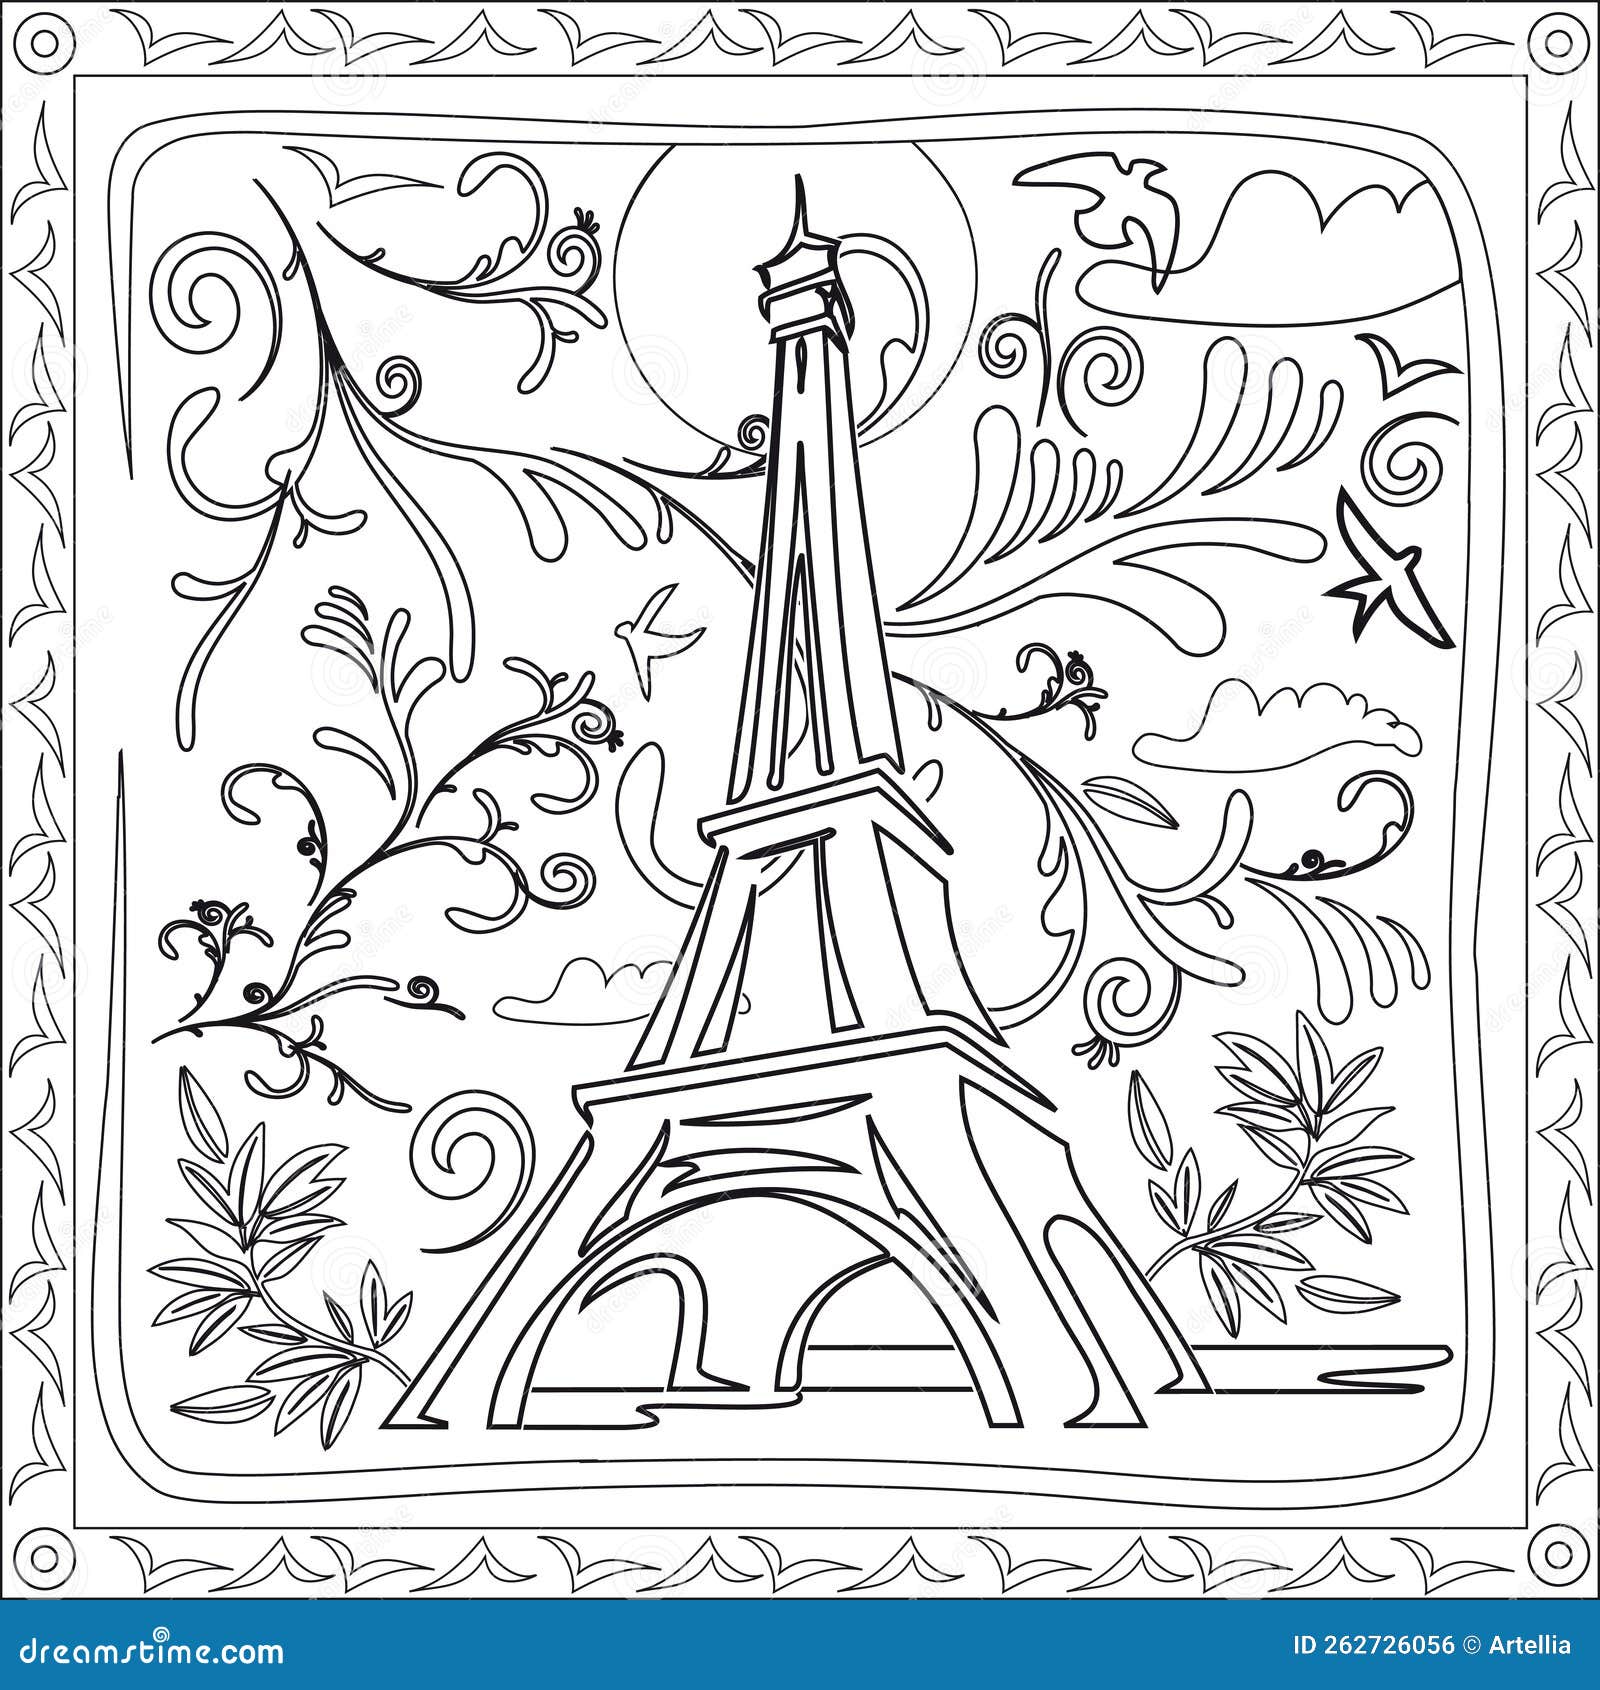 Coloring page drawing of the eiffel tower in paris with foliage and frame black and white stock vector